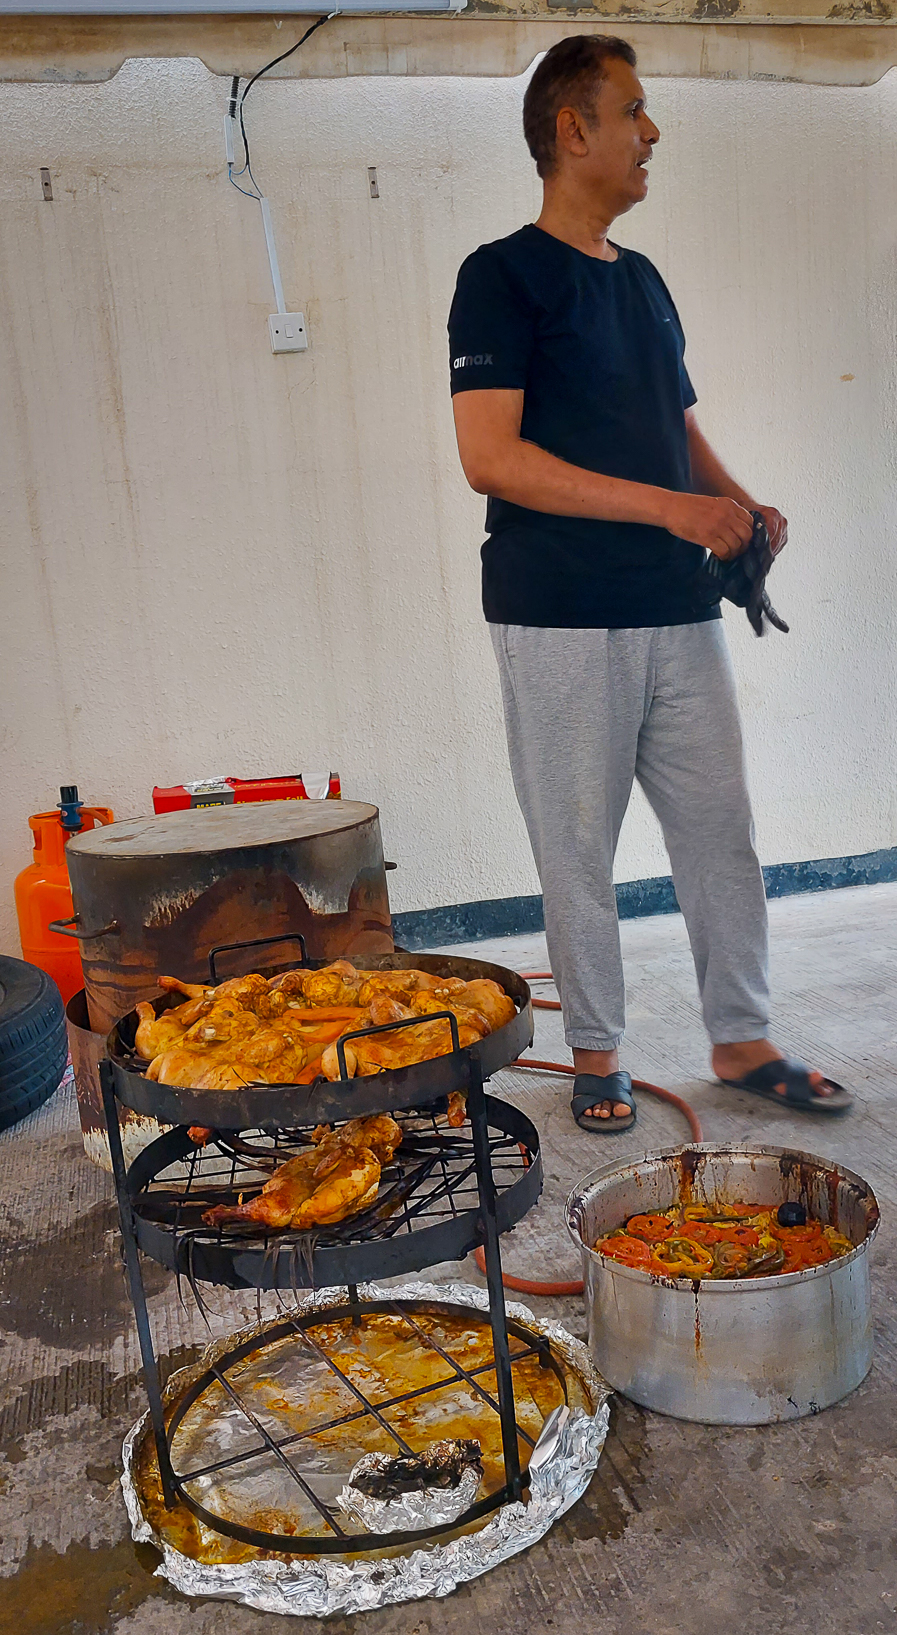 <span  class="uc_style_uc_tiles_grid_image_elementor_uc_items_attribute_title" style="color:#ffffff;">A new friend (met at a water-supply where we refilled the water-tank): invited us for dinner at home, ...and cooked 'mandi' for us</span>